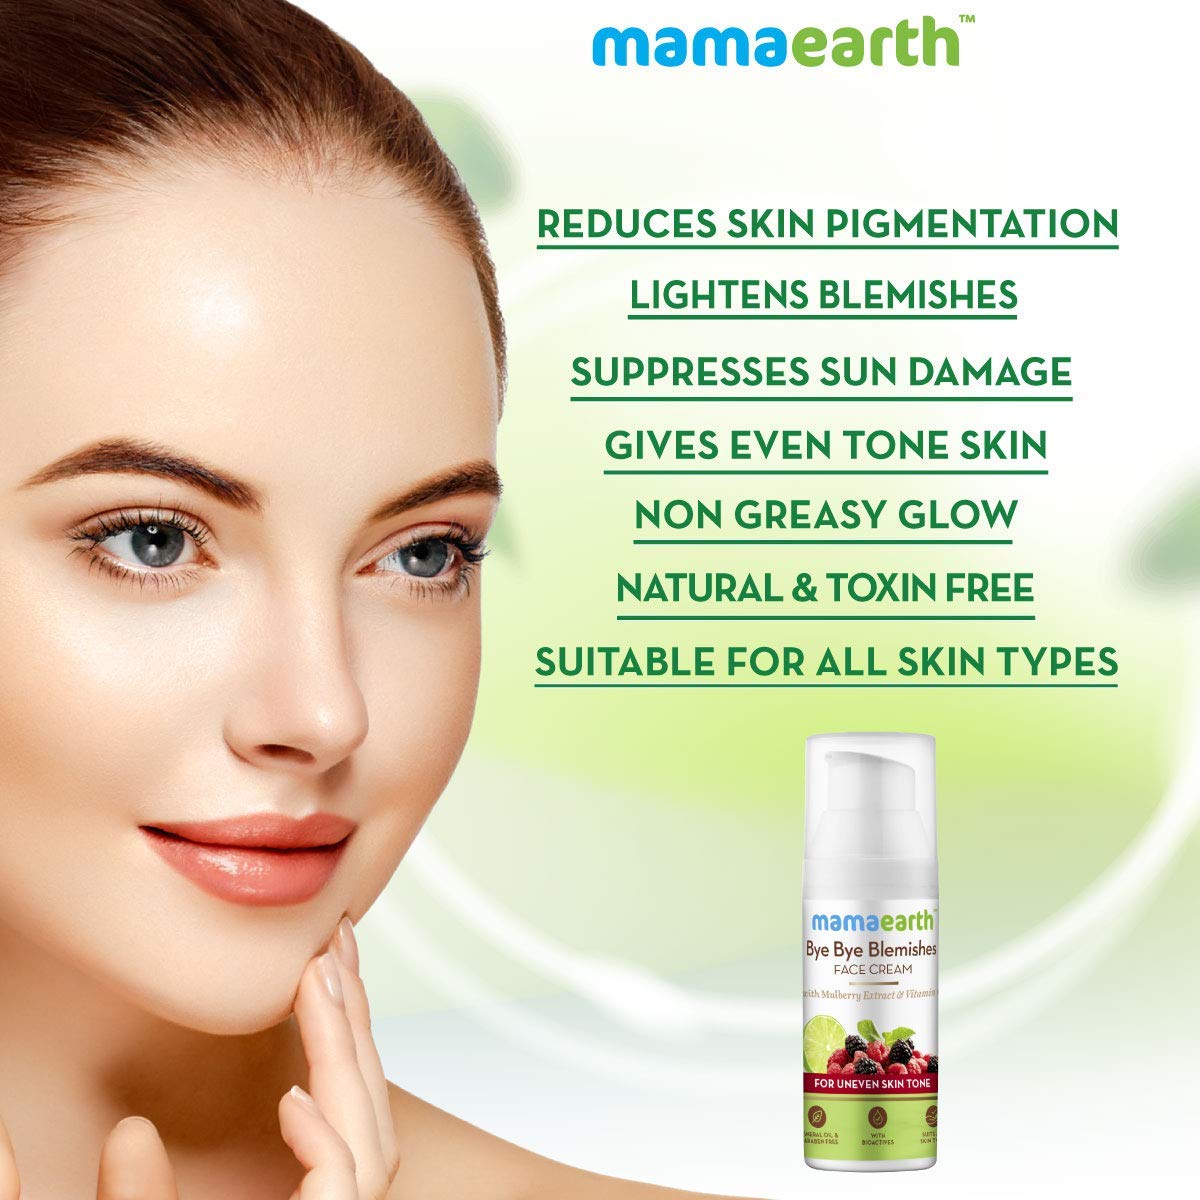 Mamaearth Bye Bye Blemishes Face Cream, For Pigmentation & Blemish Removal, With Mulberry Extract & Vitamin C - 30ml  from Mamaearth